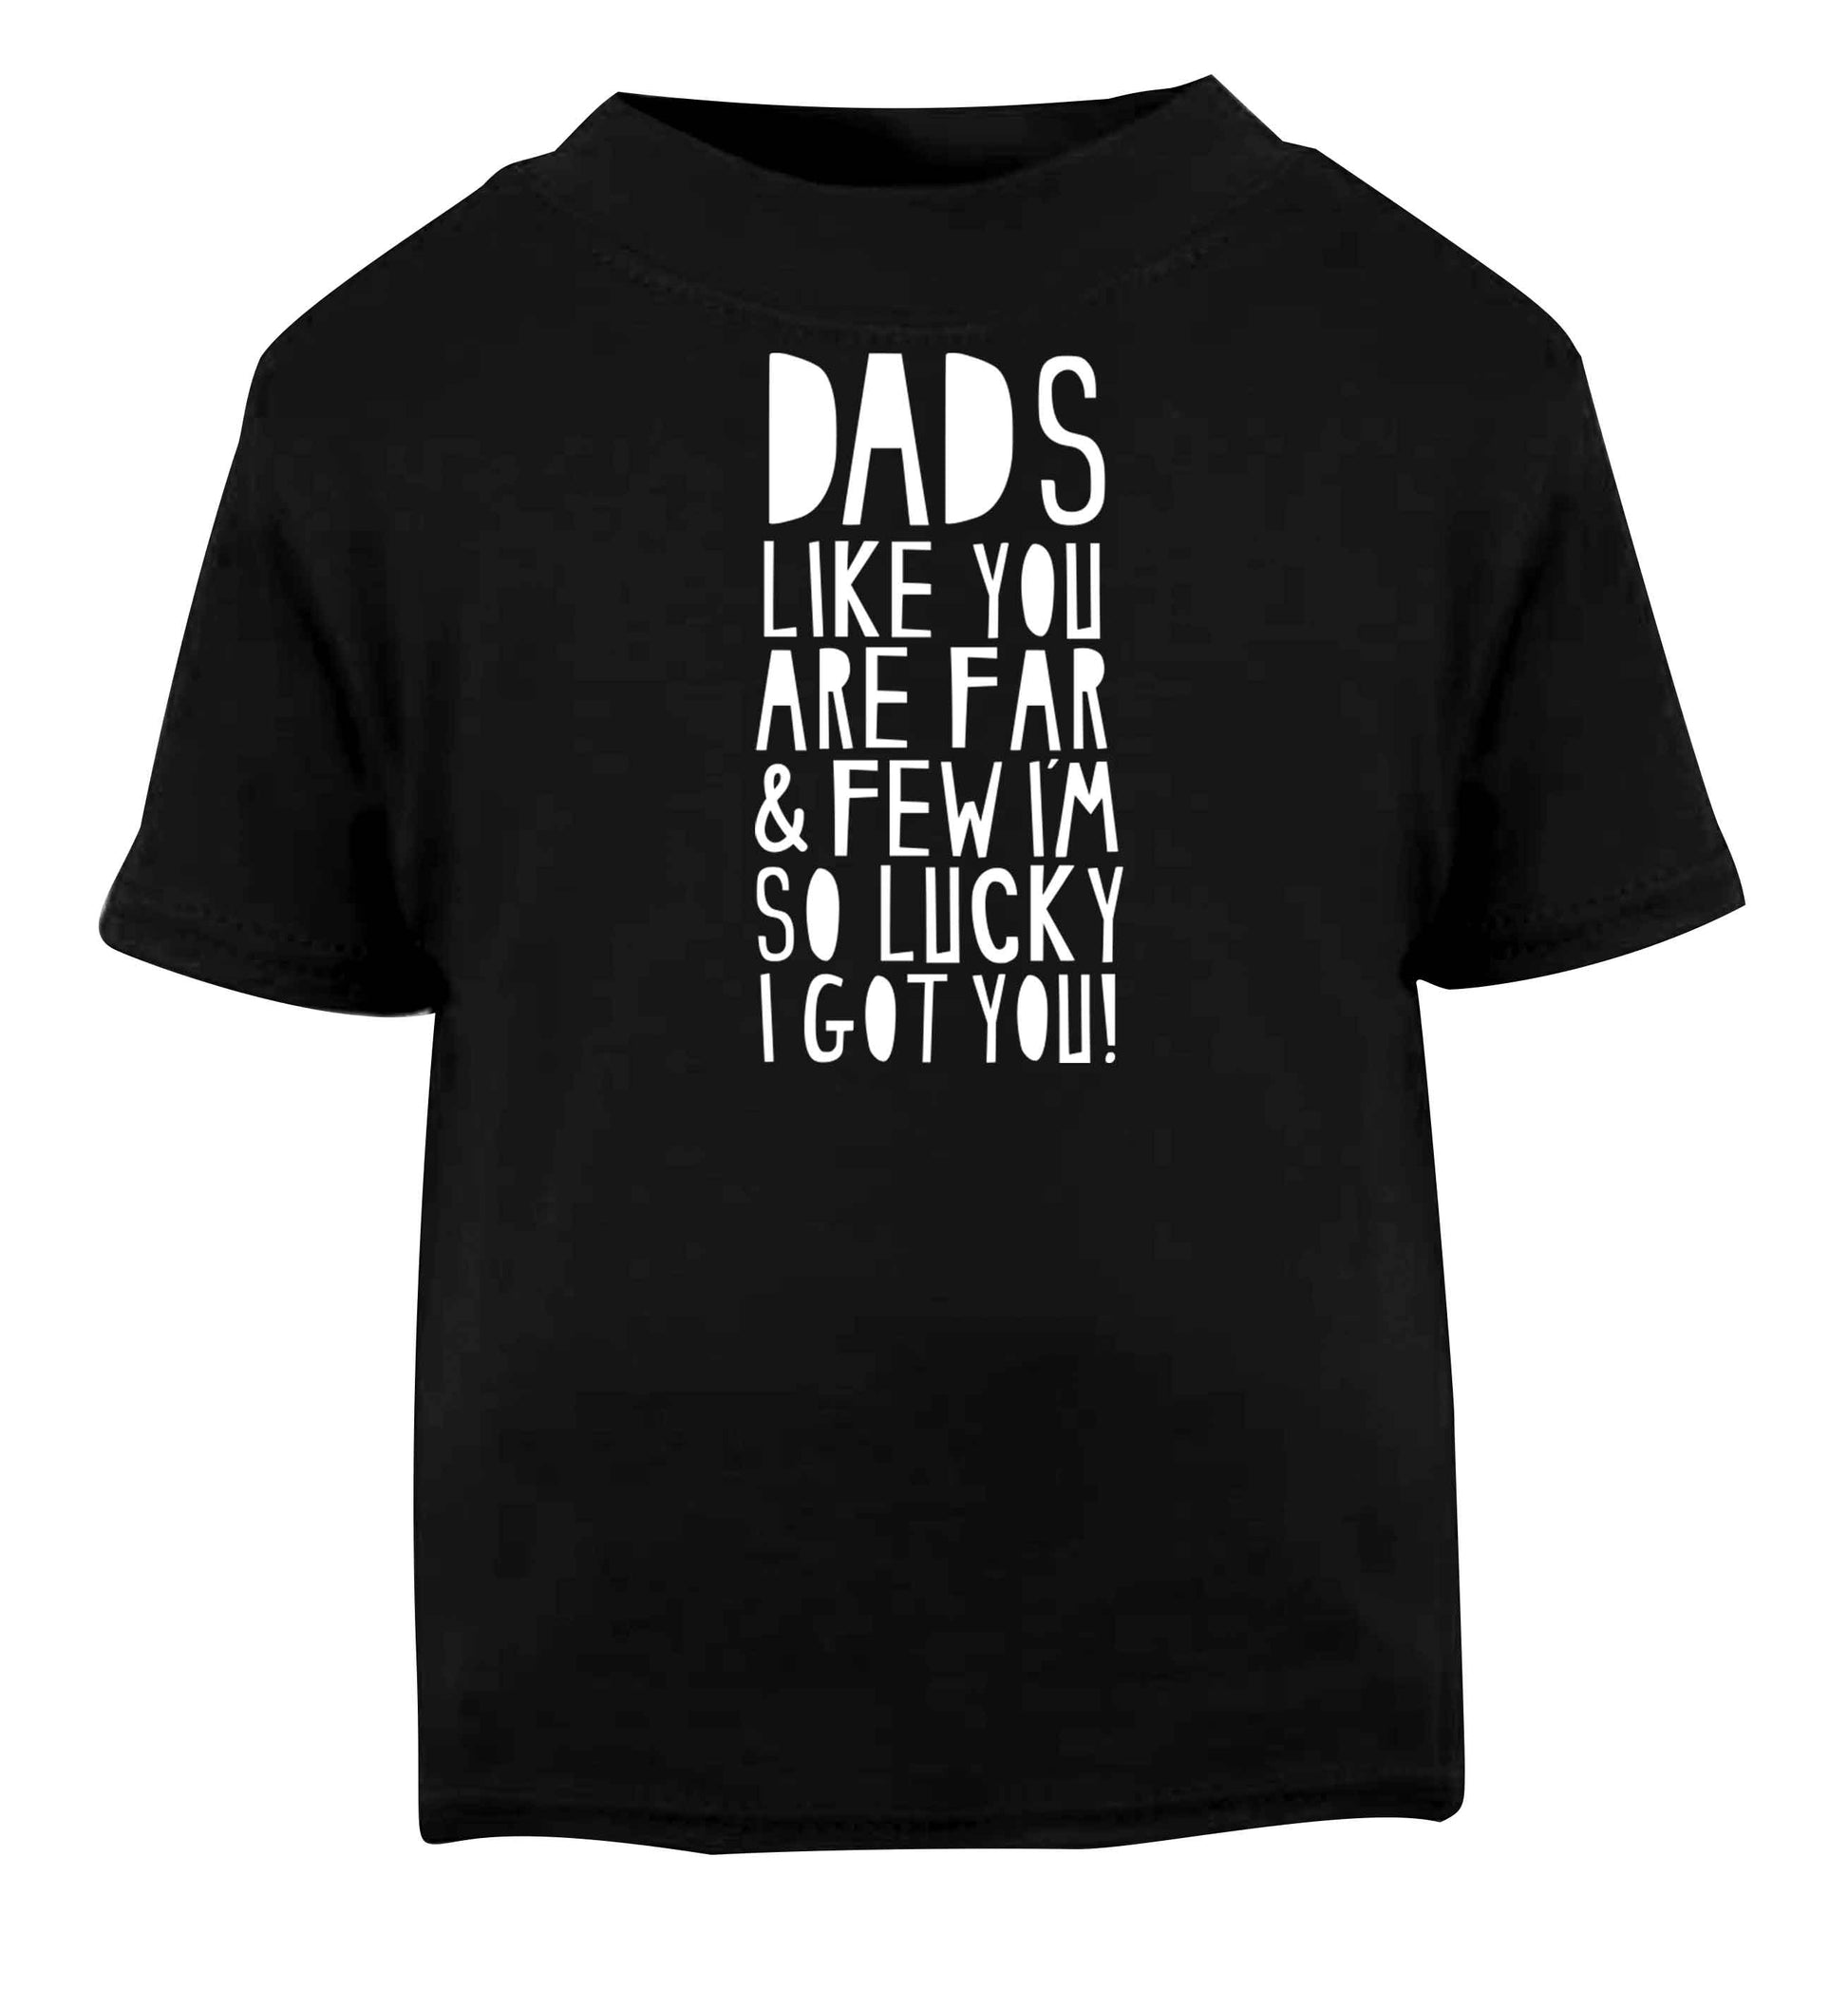 Dads like you are far and few I'm so luck I got you! Black baby toddler Tshirt 2 years